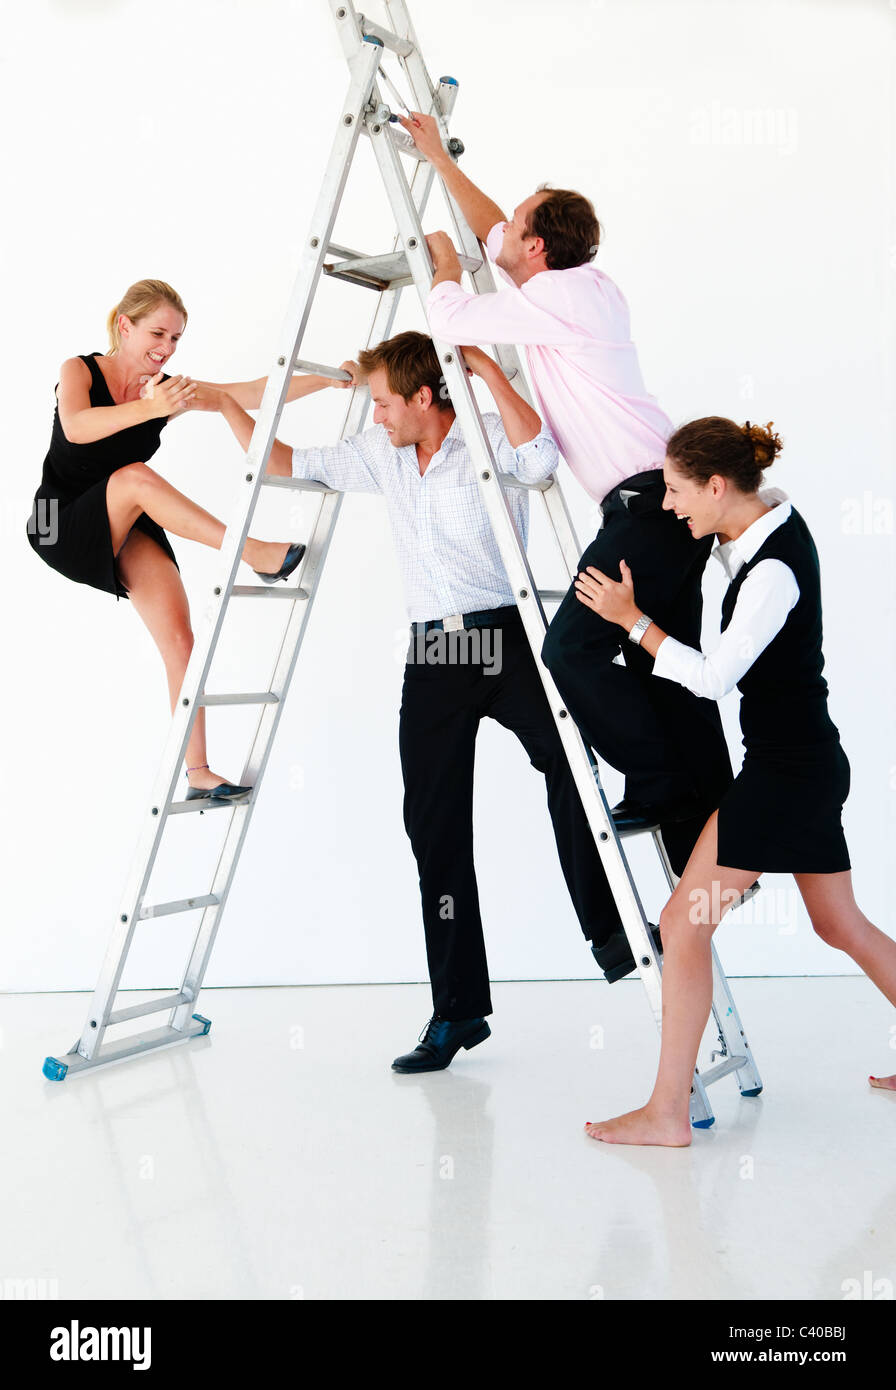 Team fight on reach top of ladder Stock Photo